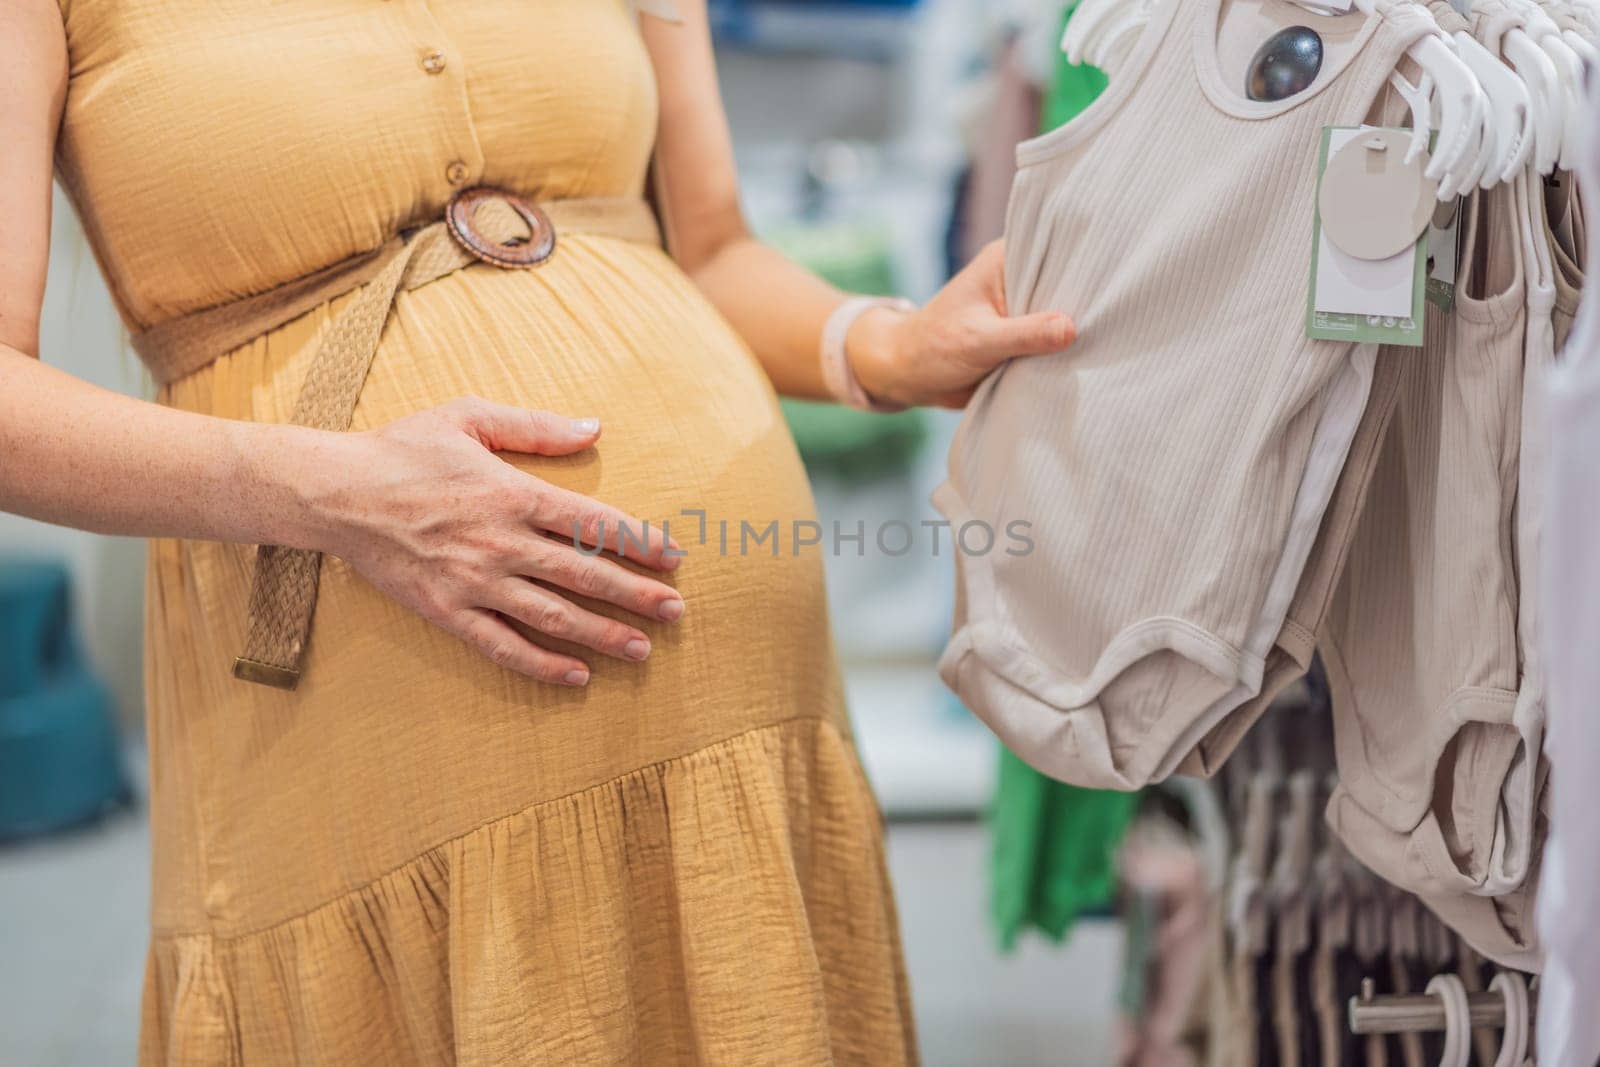 Expectant mother joyfully selects adorable clothes for her unborn baby while enjoying a shopping spree in the vibrant aisles of the shopping center by galitskaya